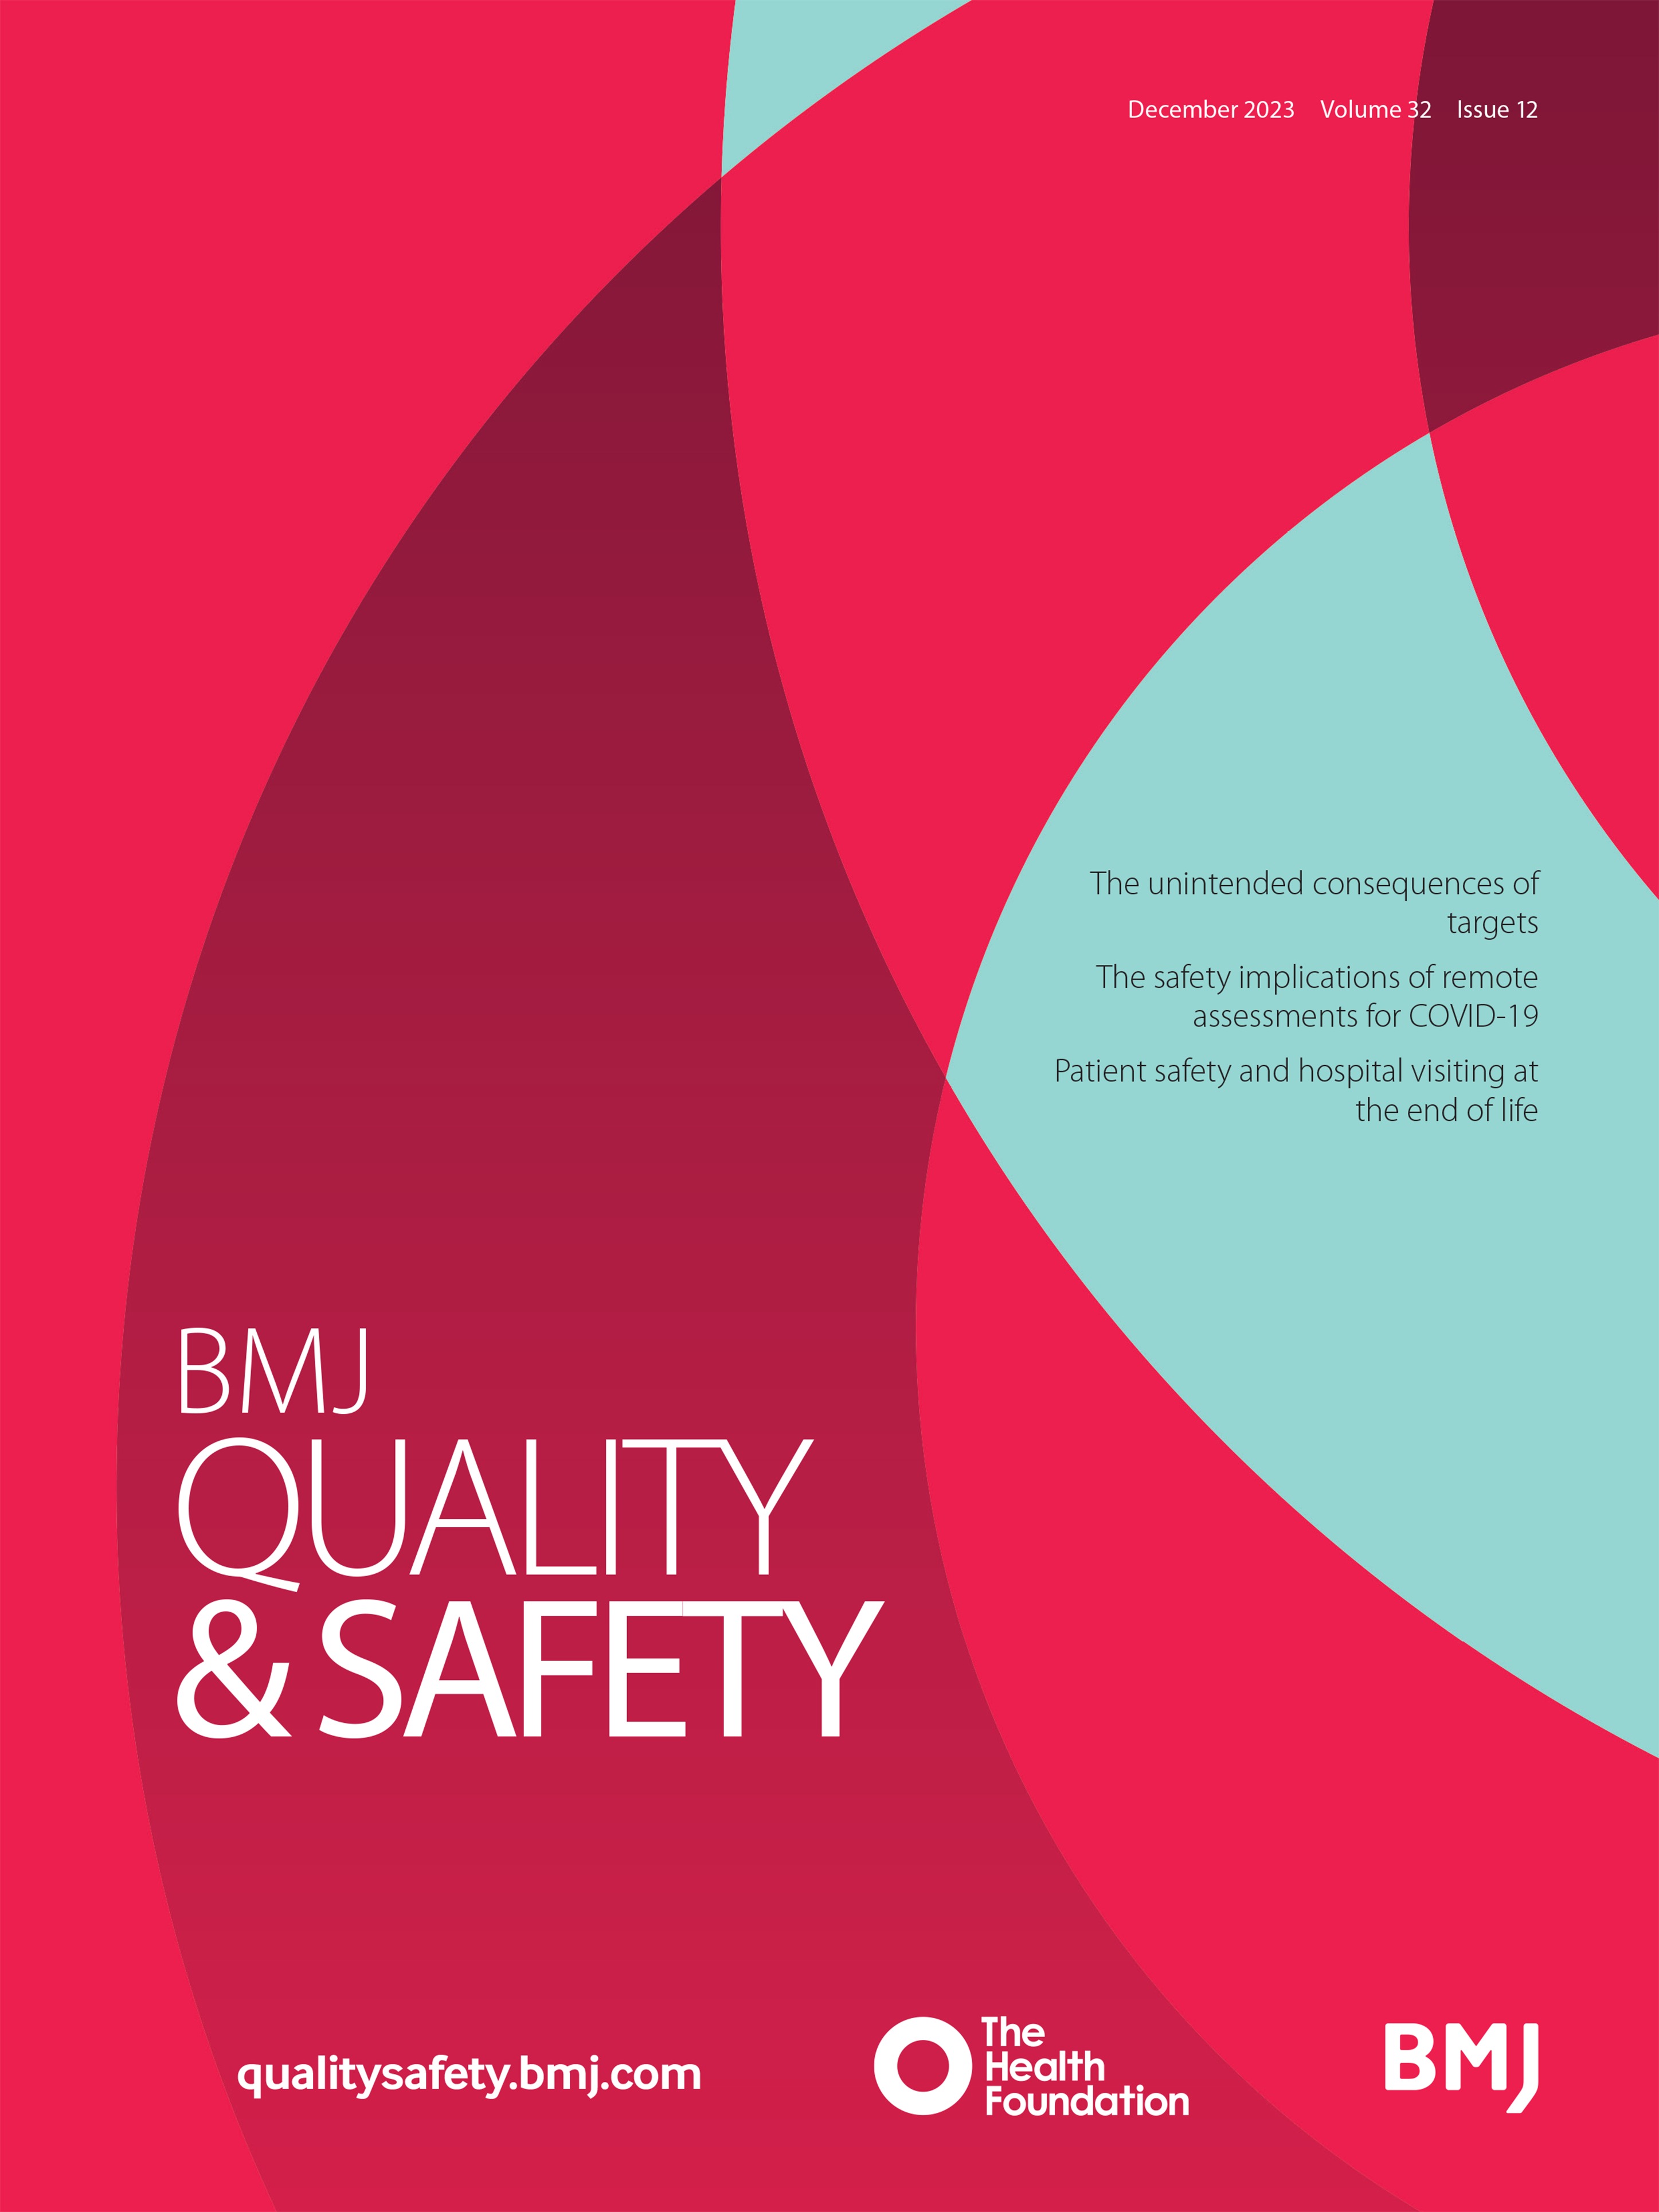 Handling missing values in the analysis of between-hospital differences in ordinal and dichotomous outcomes: a simulation study